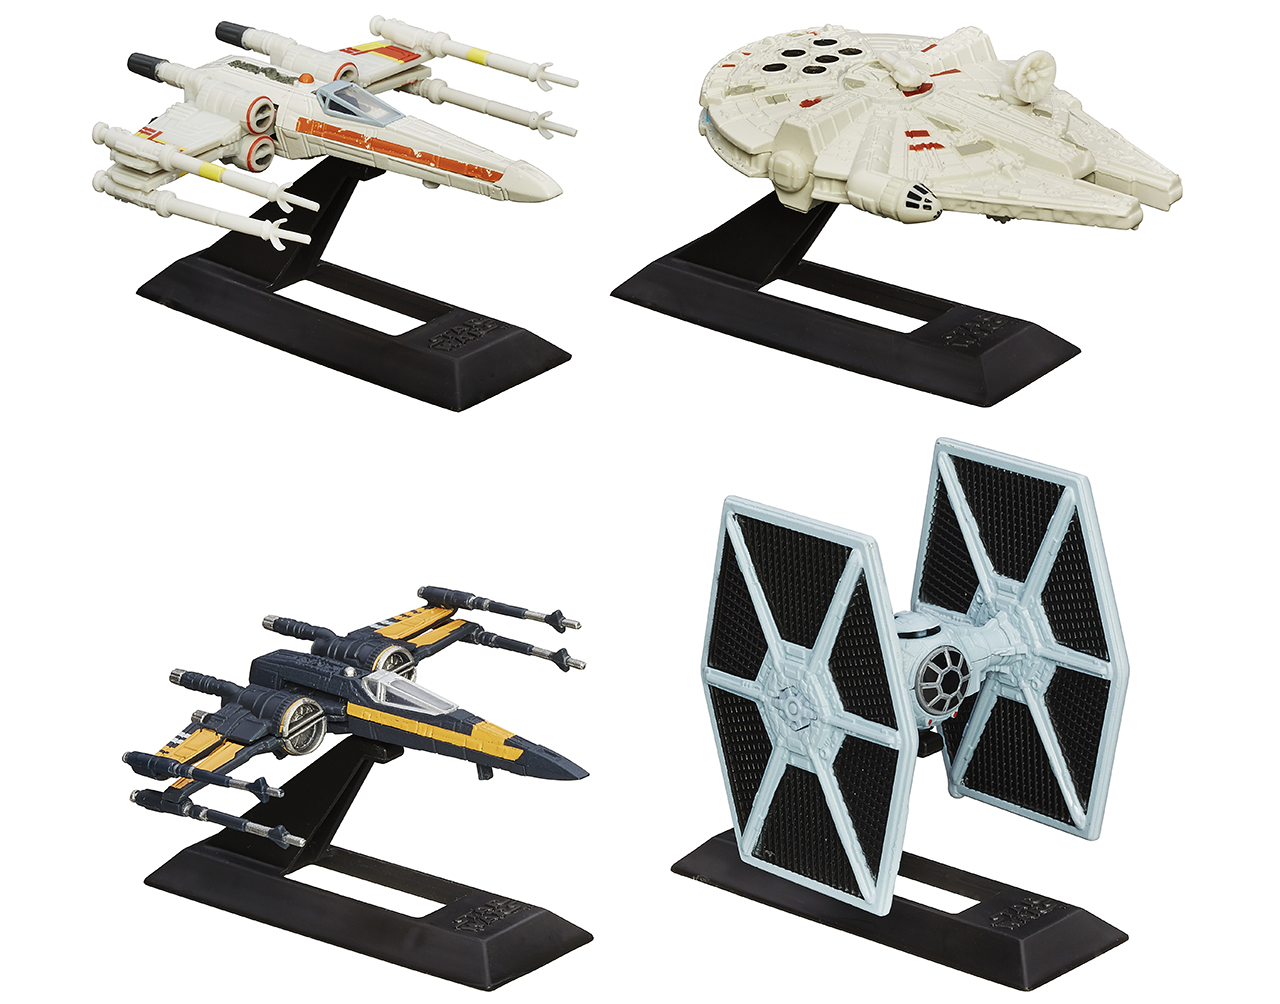 Clear Your Toy Shelves And Make Room For A New Fleet Of Star Wars Vehicles